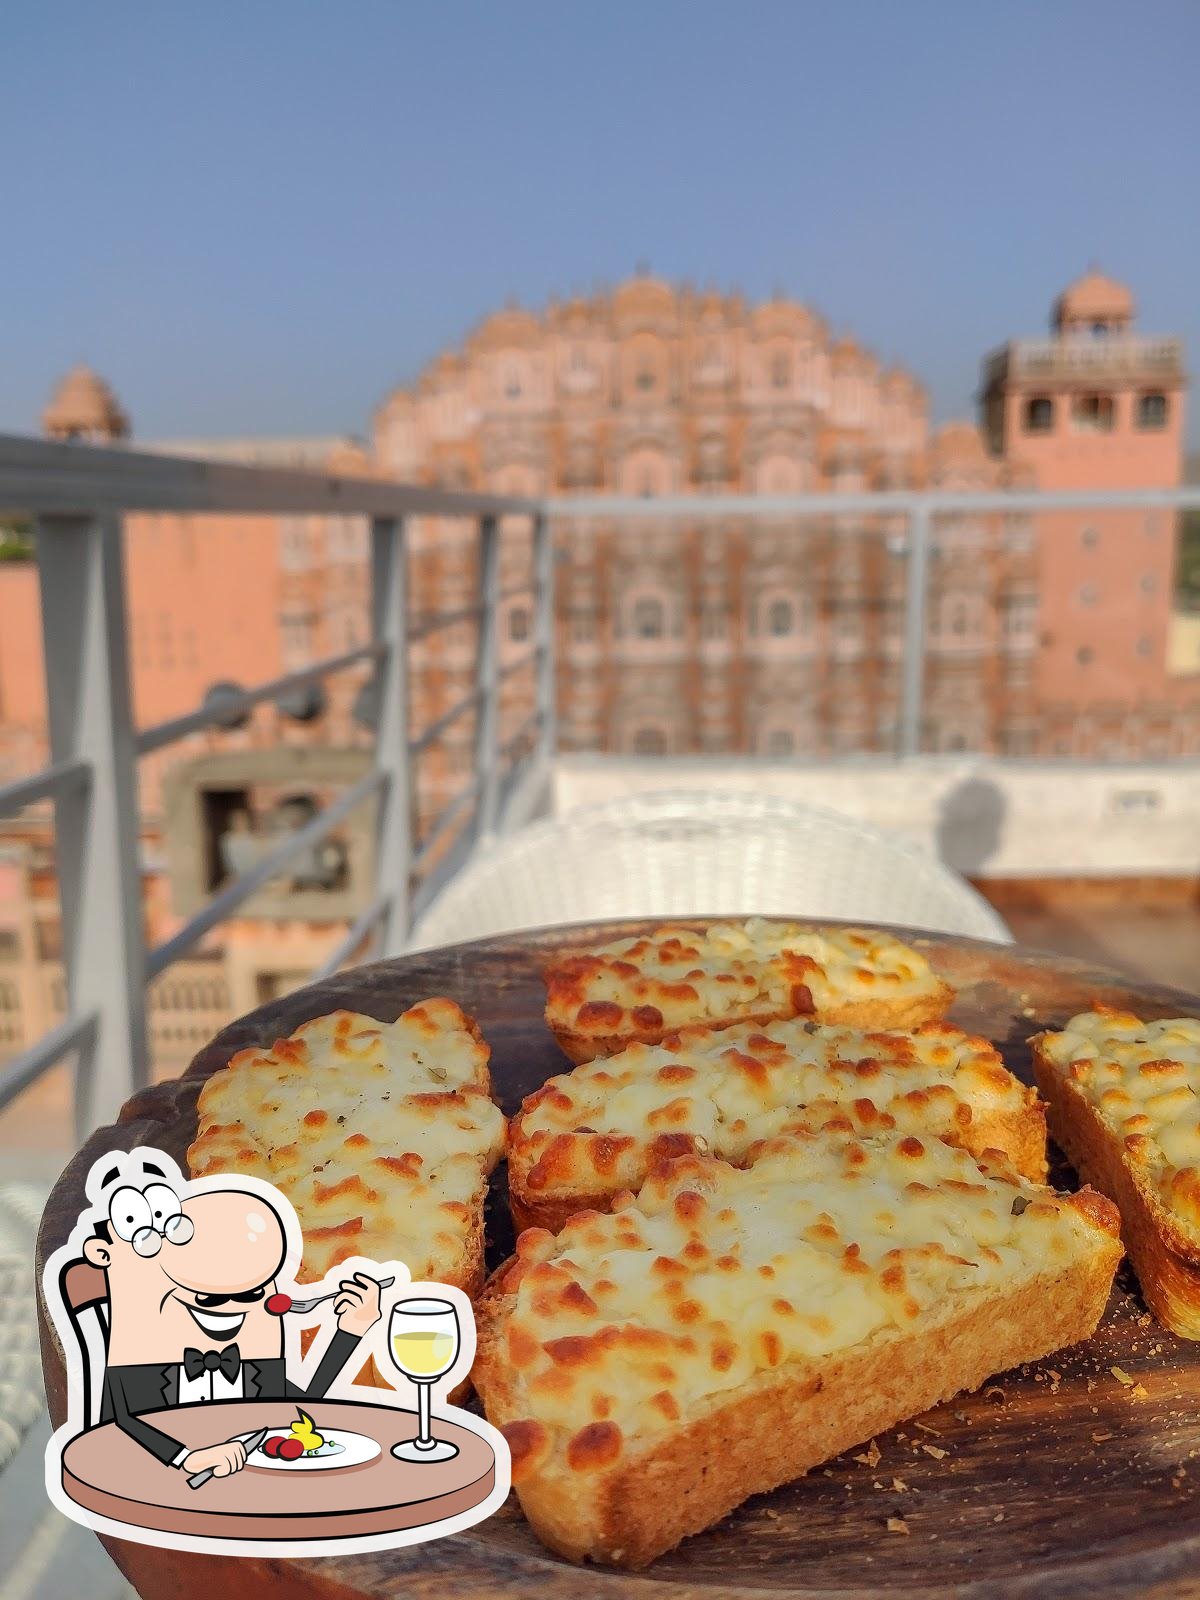 Top 10 Things to Do in Jaipur How to Spend 2 Days in Jaipur